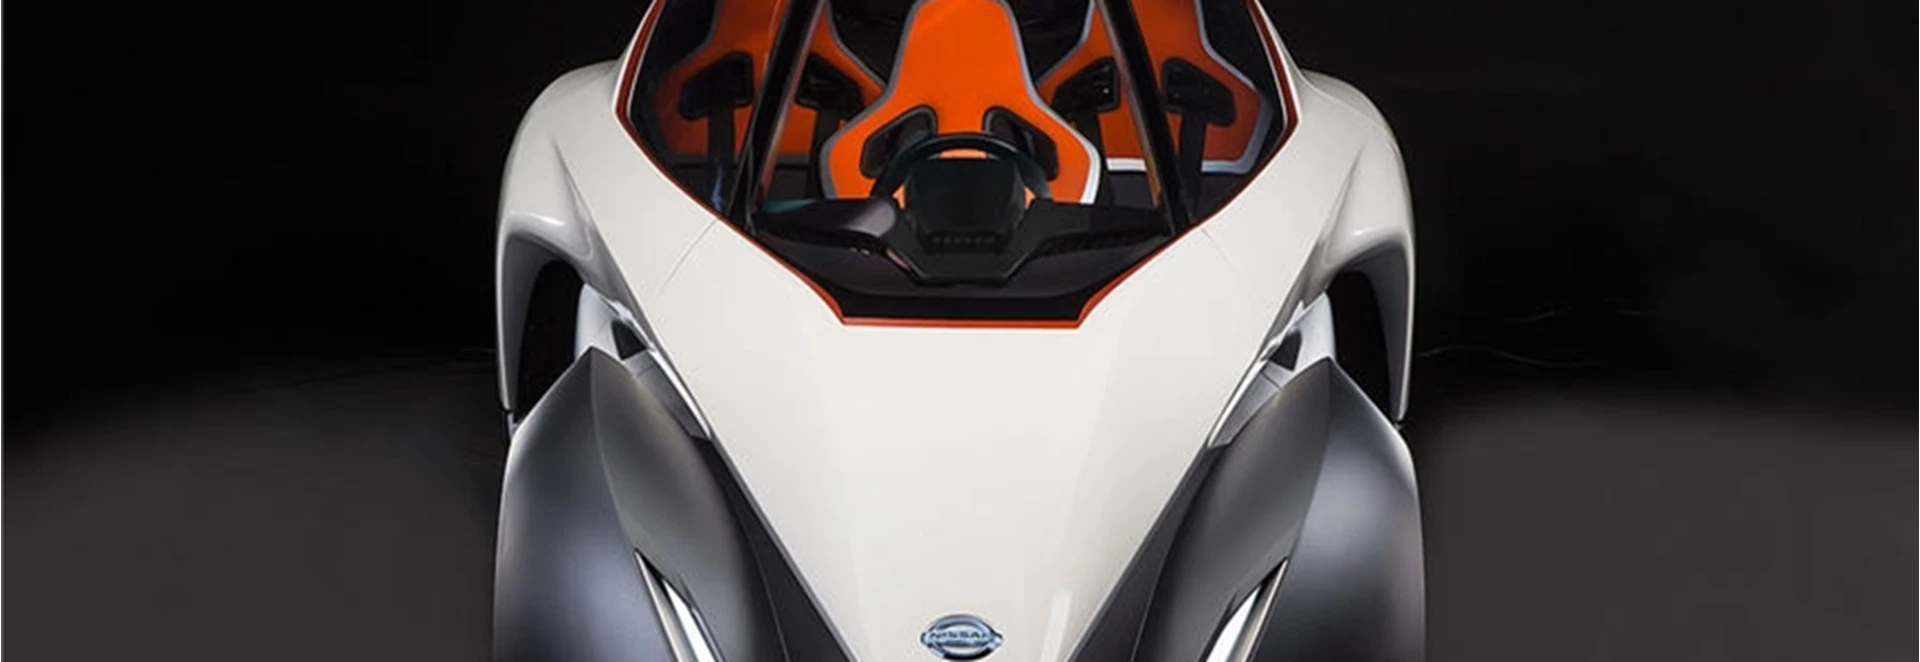 New Nissan BladeGlider unveiled: electric rival to Ariel Atom